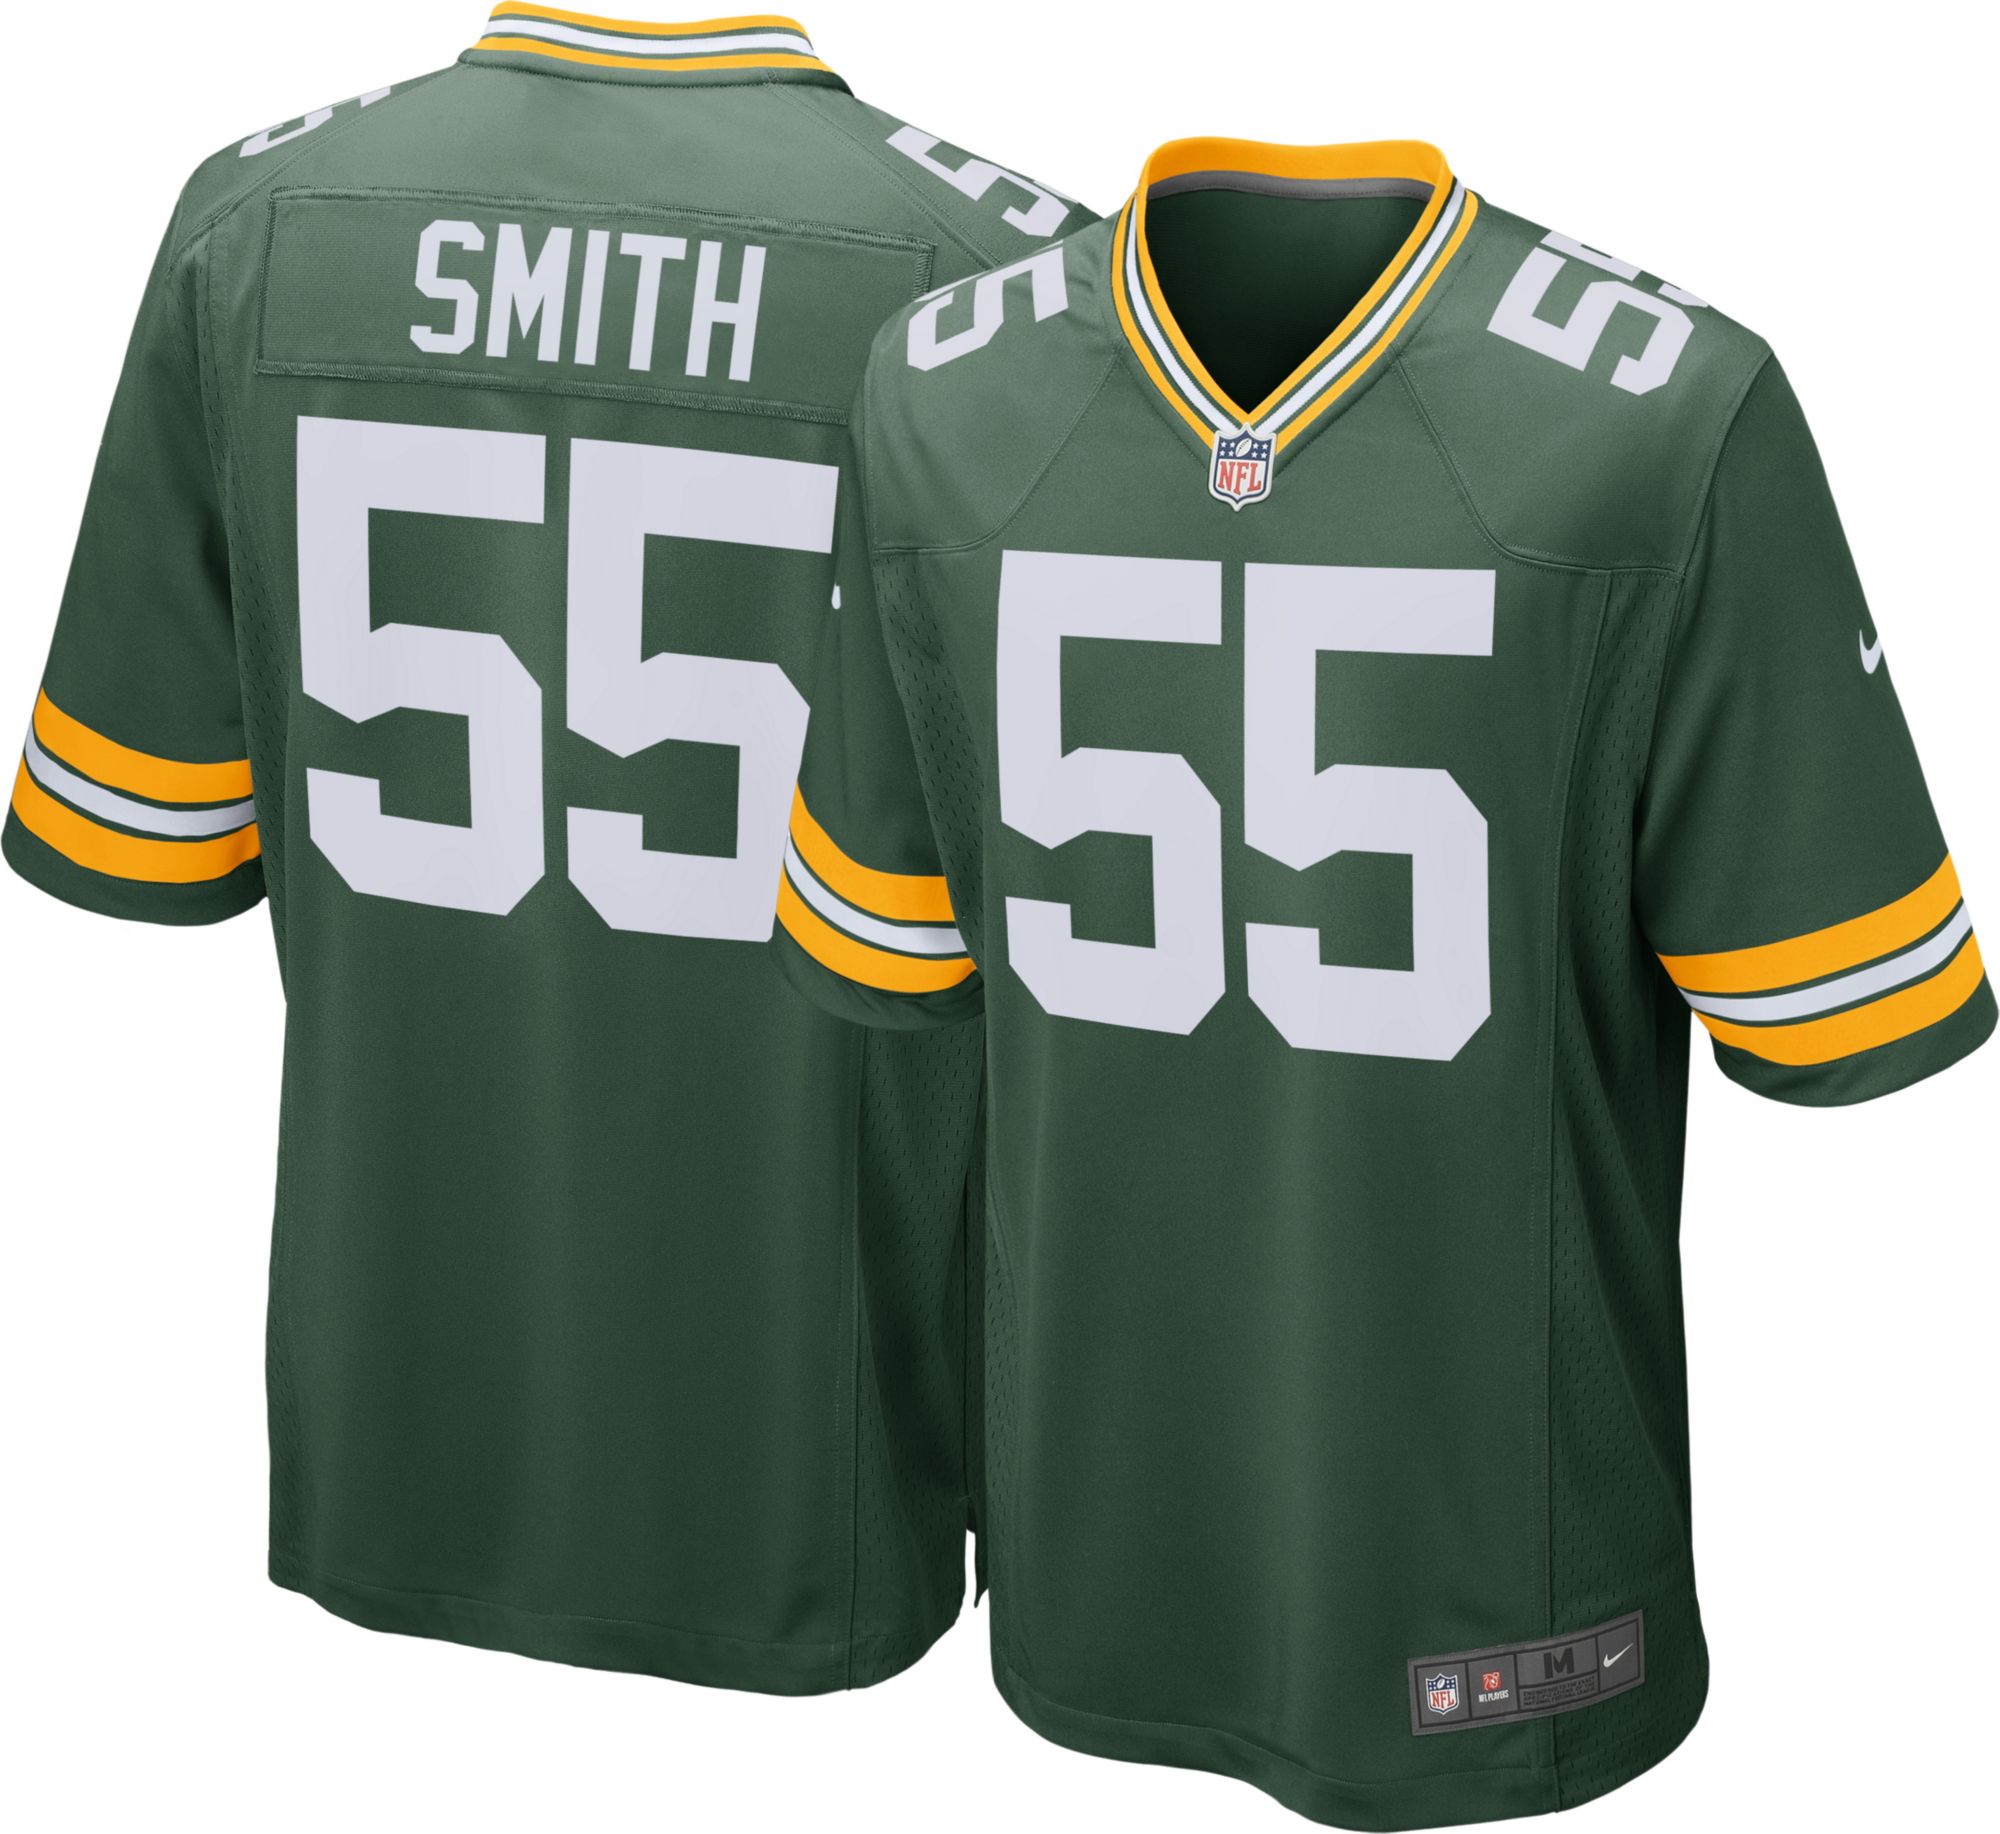 jersey smith